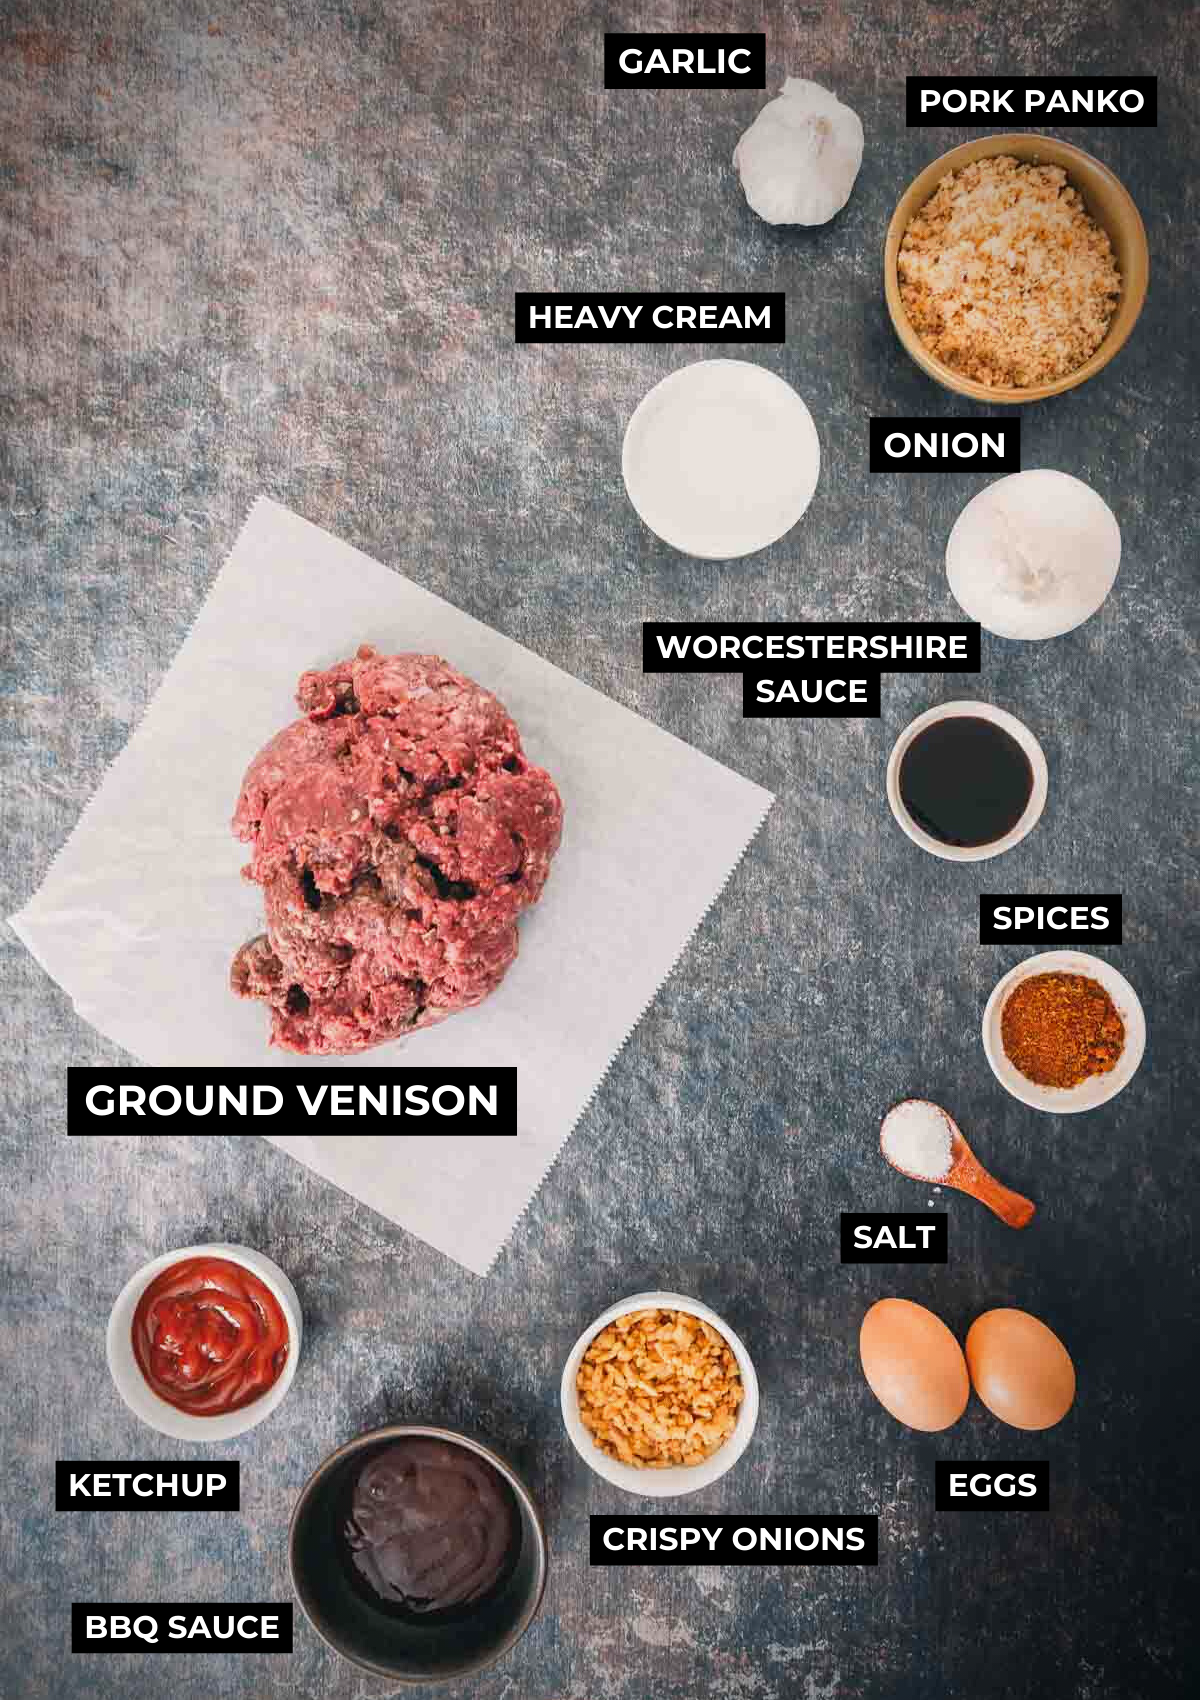 Ingredients for this meatloaf recipe.